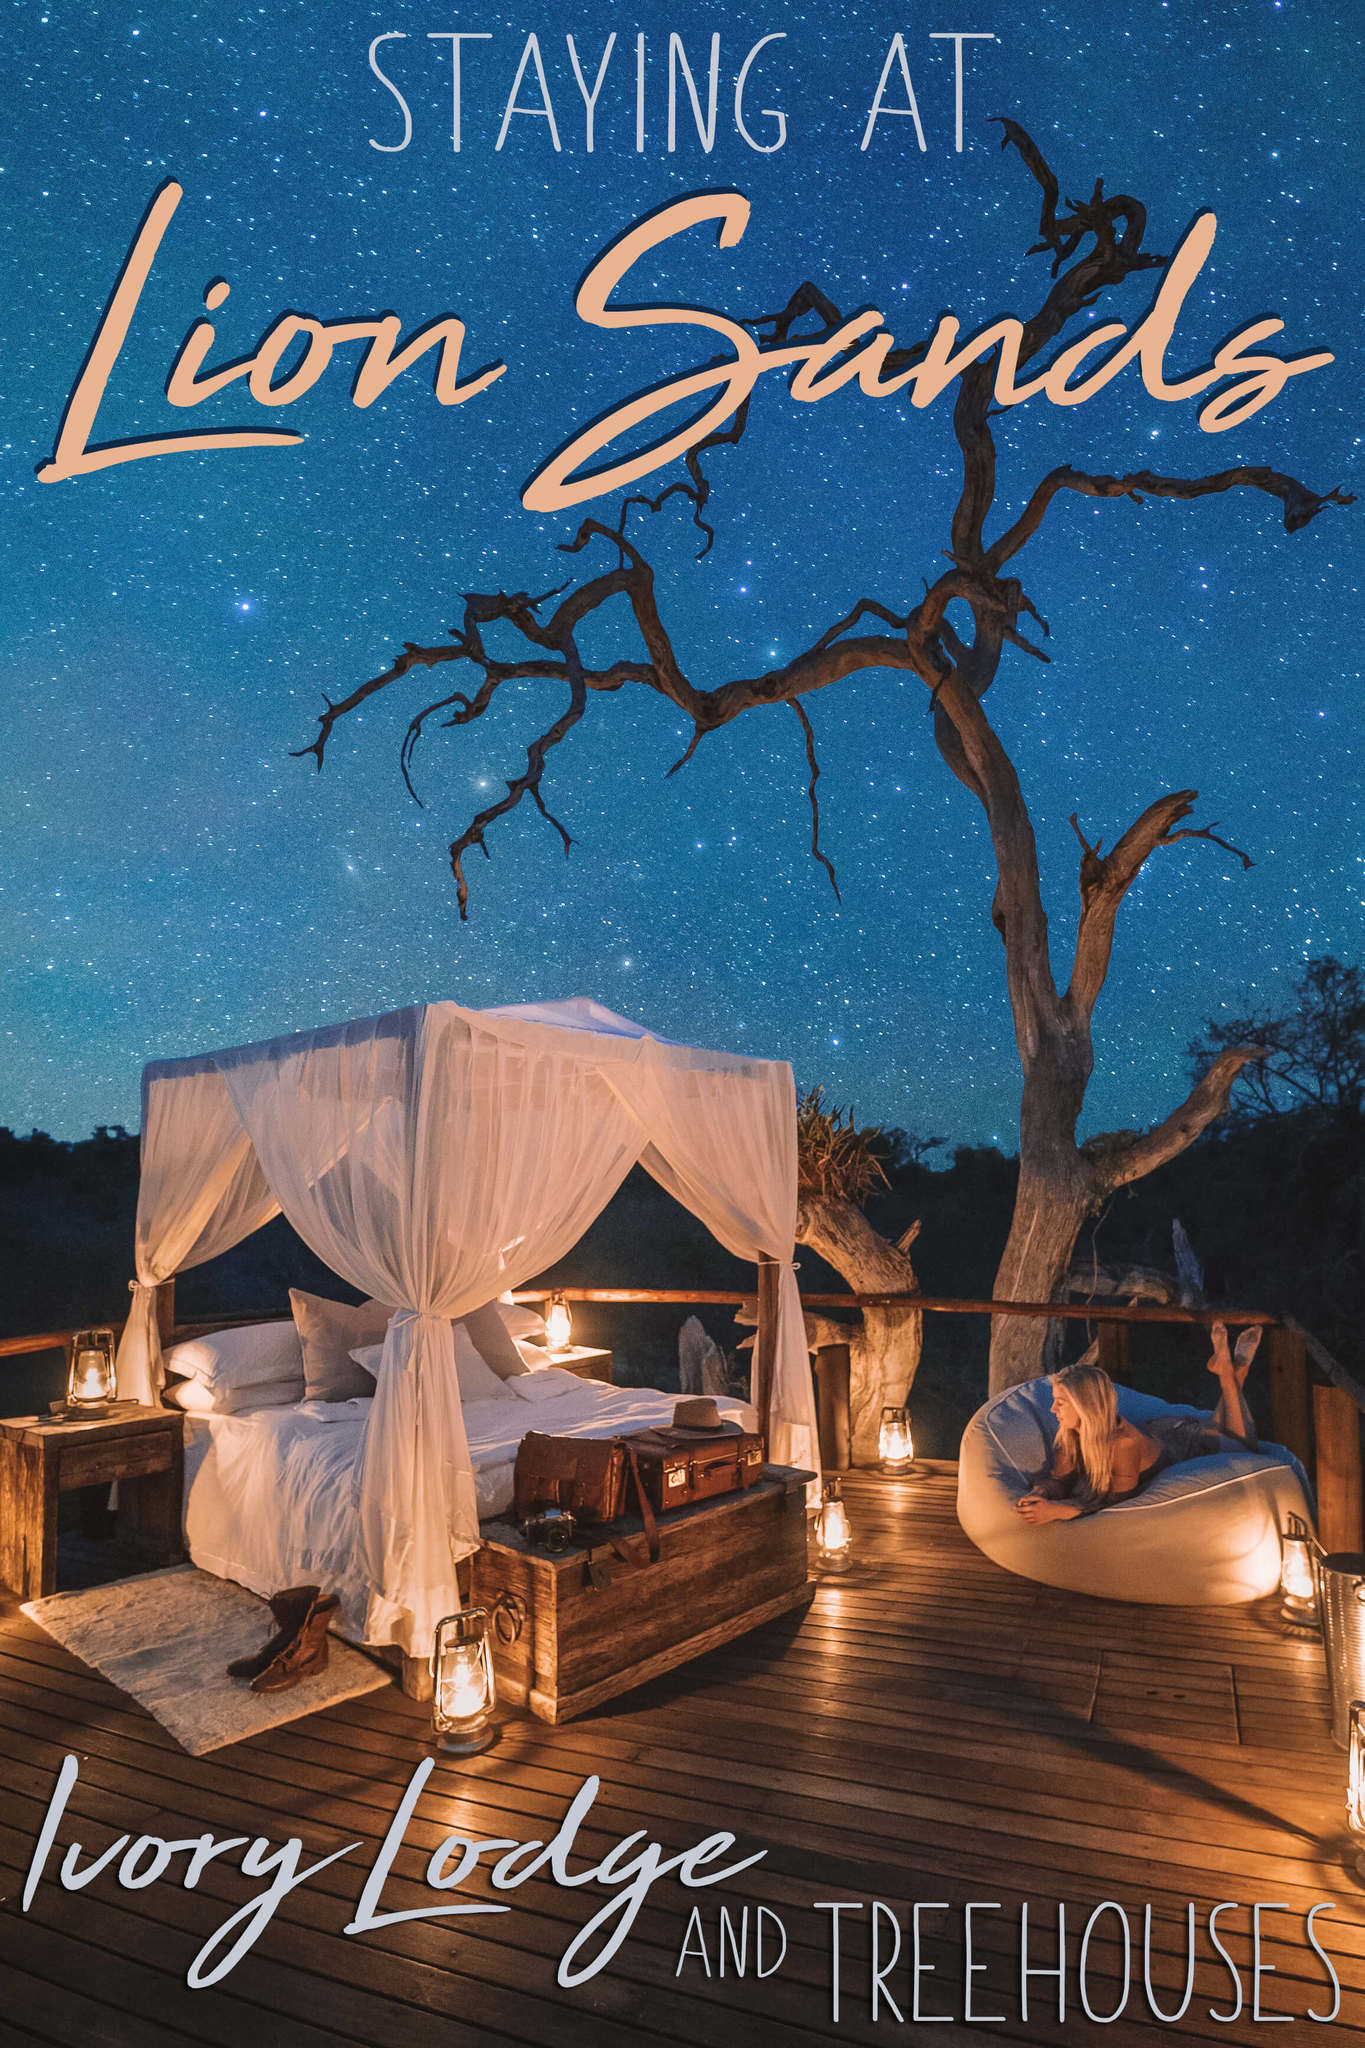 Staying at Lion Sands Ivory Lodge and Treehouses